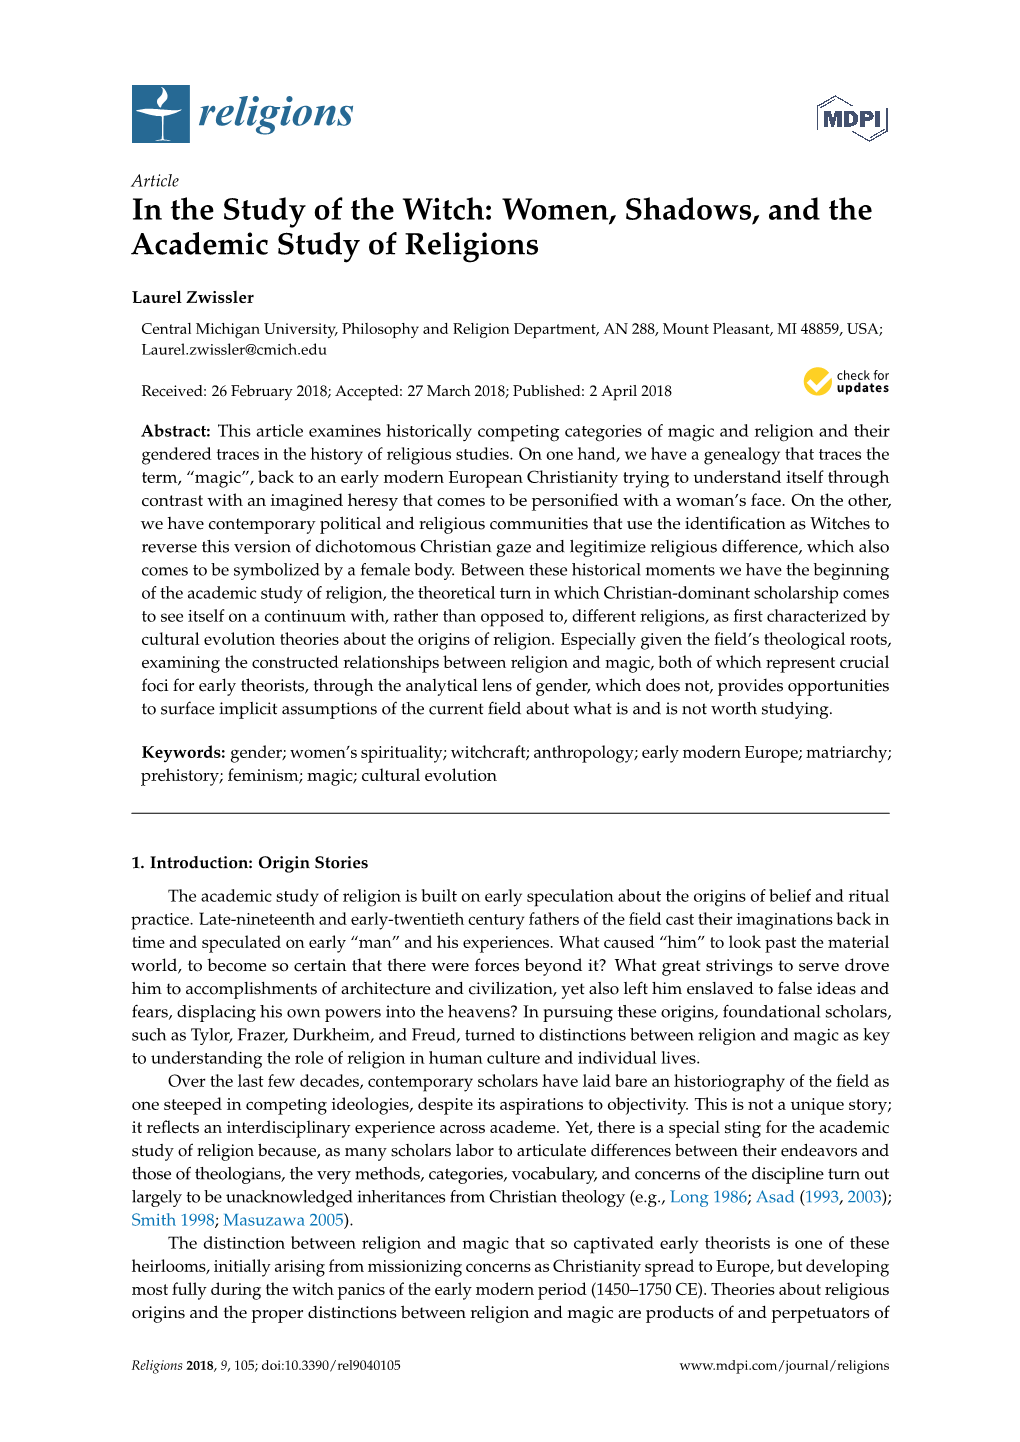 In the Study of the Witch: Women, Shadows, and the Academic Study of Religions